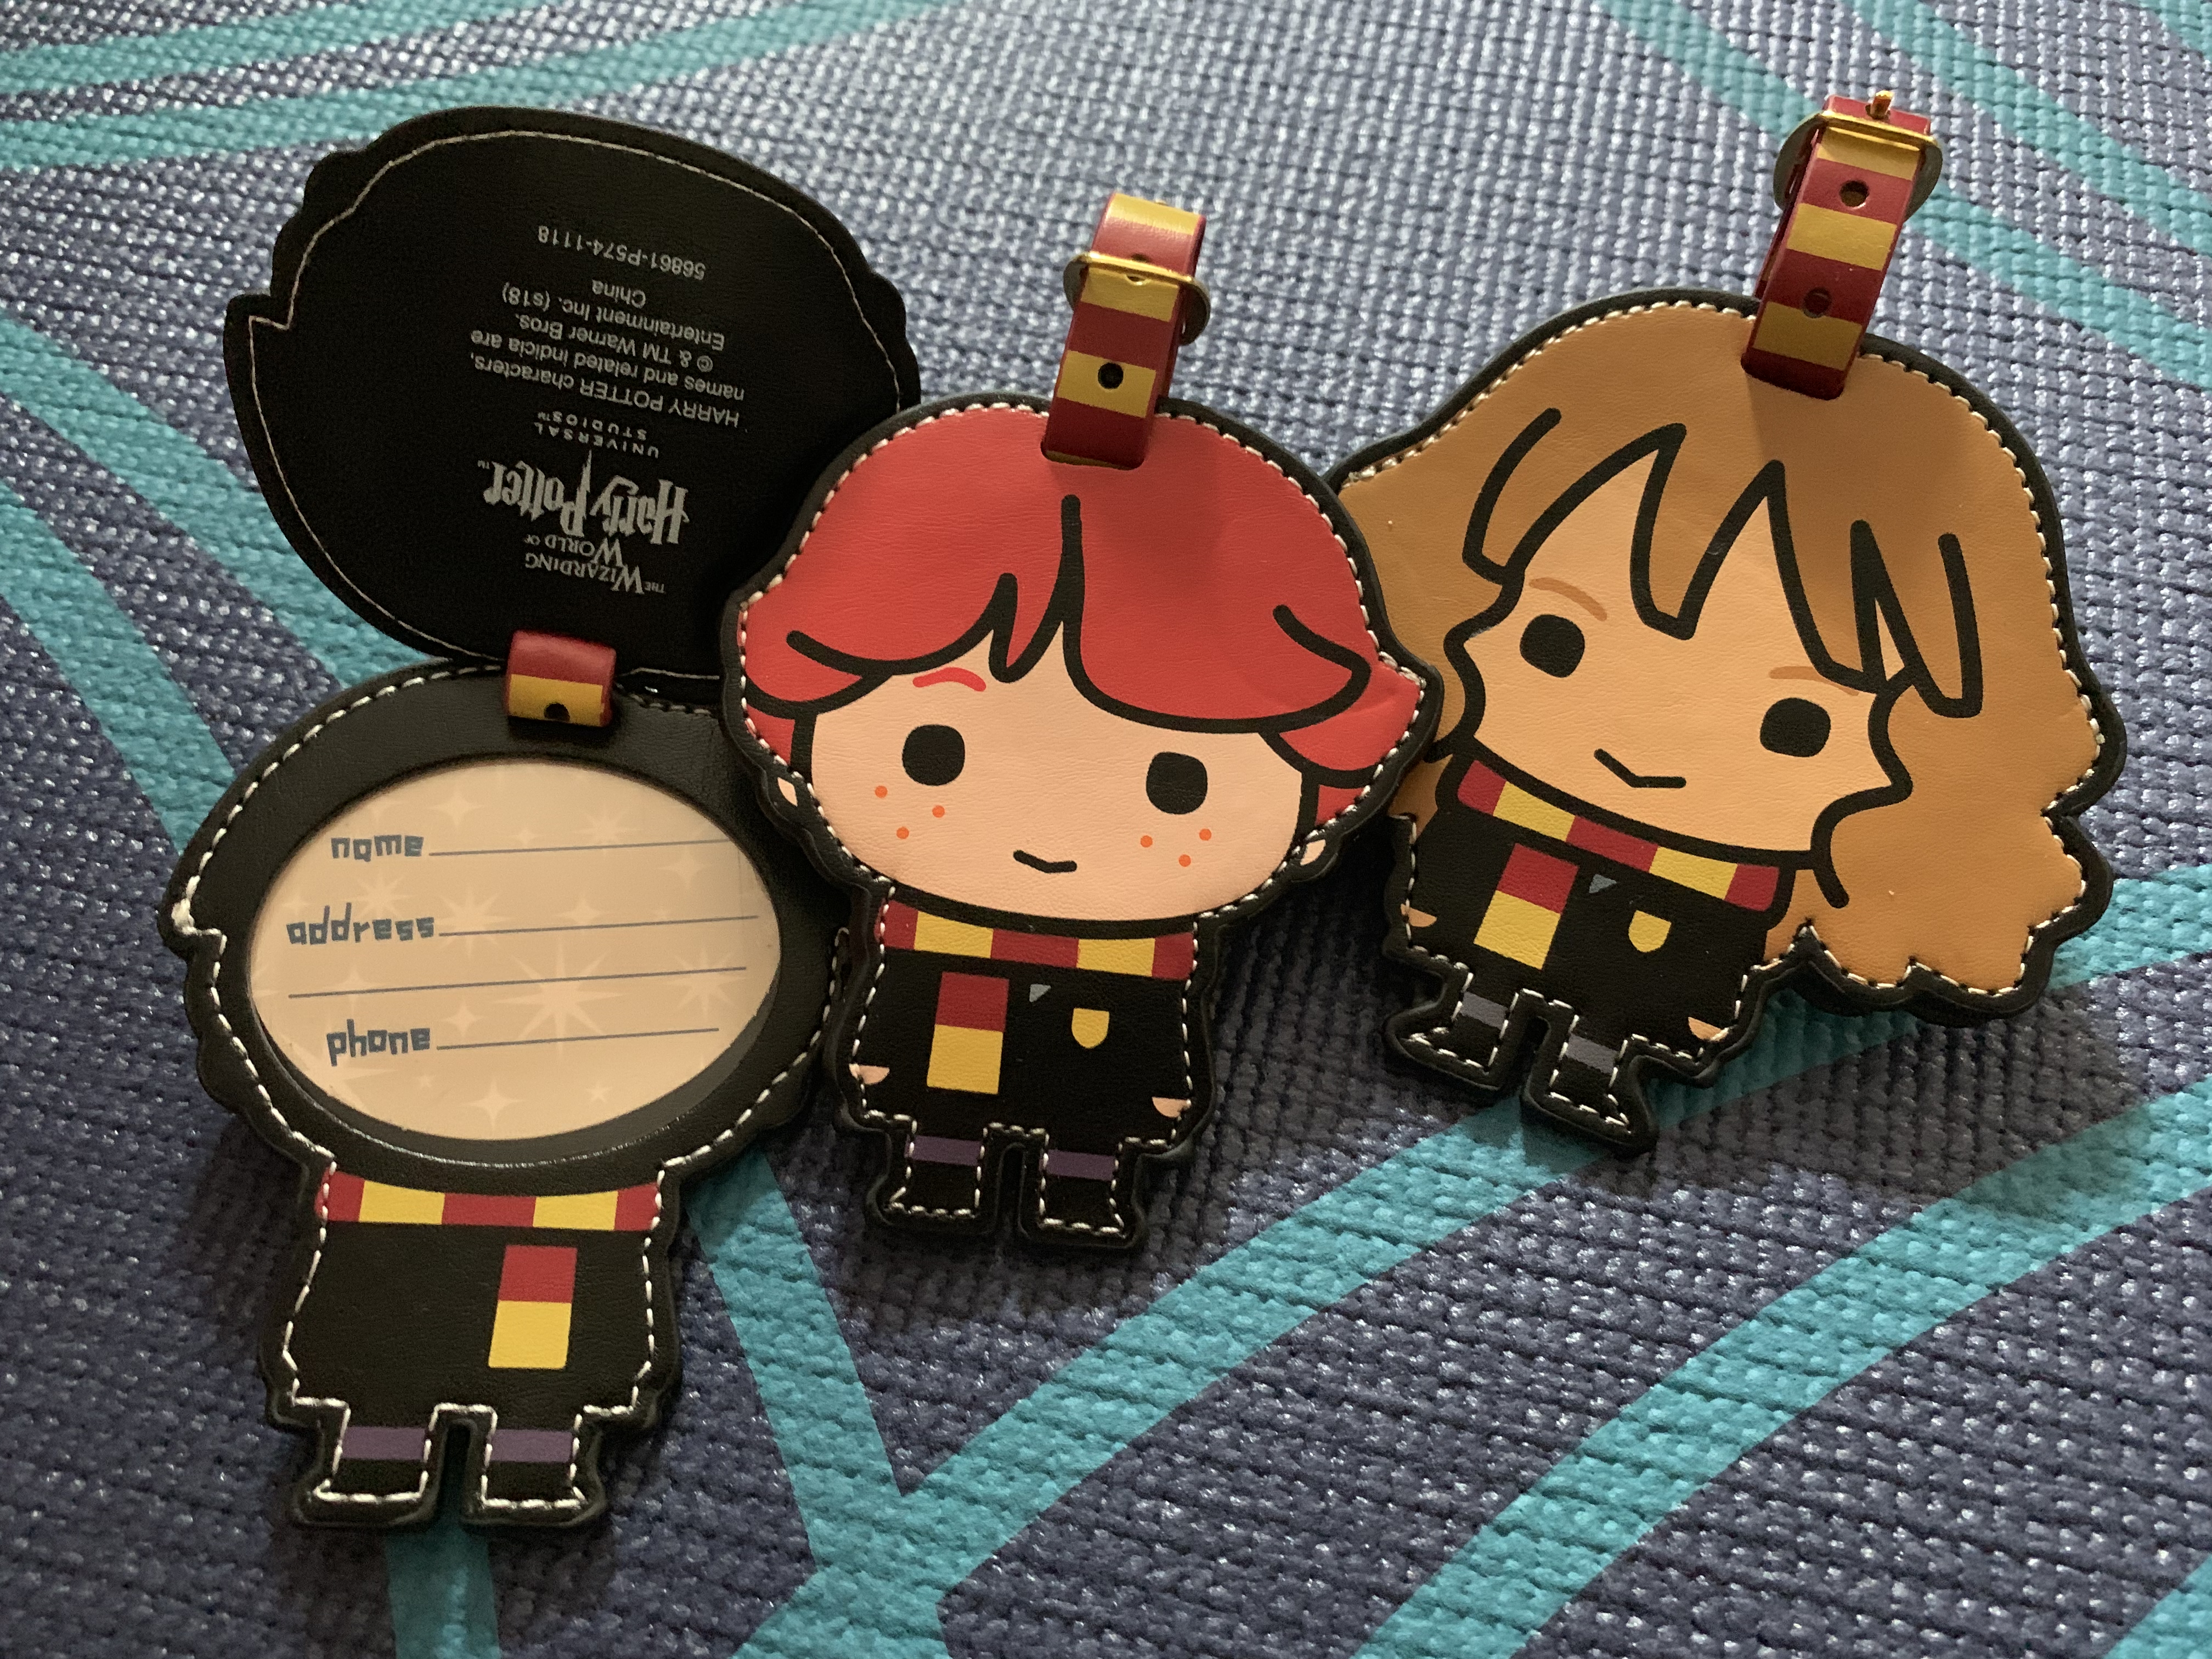 Your “Wizarding World of Harry Potter Exclusive Vacation Package” will include one set of three luggage tags (Harry, Ron, and Hermione). The backs of the tags lift to reveal the owner’s personal information.